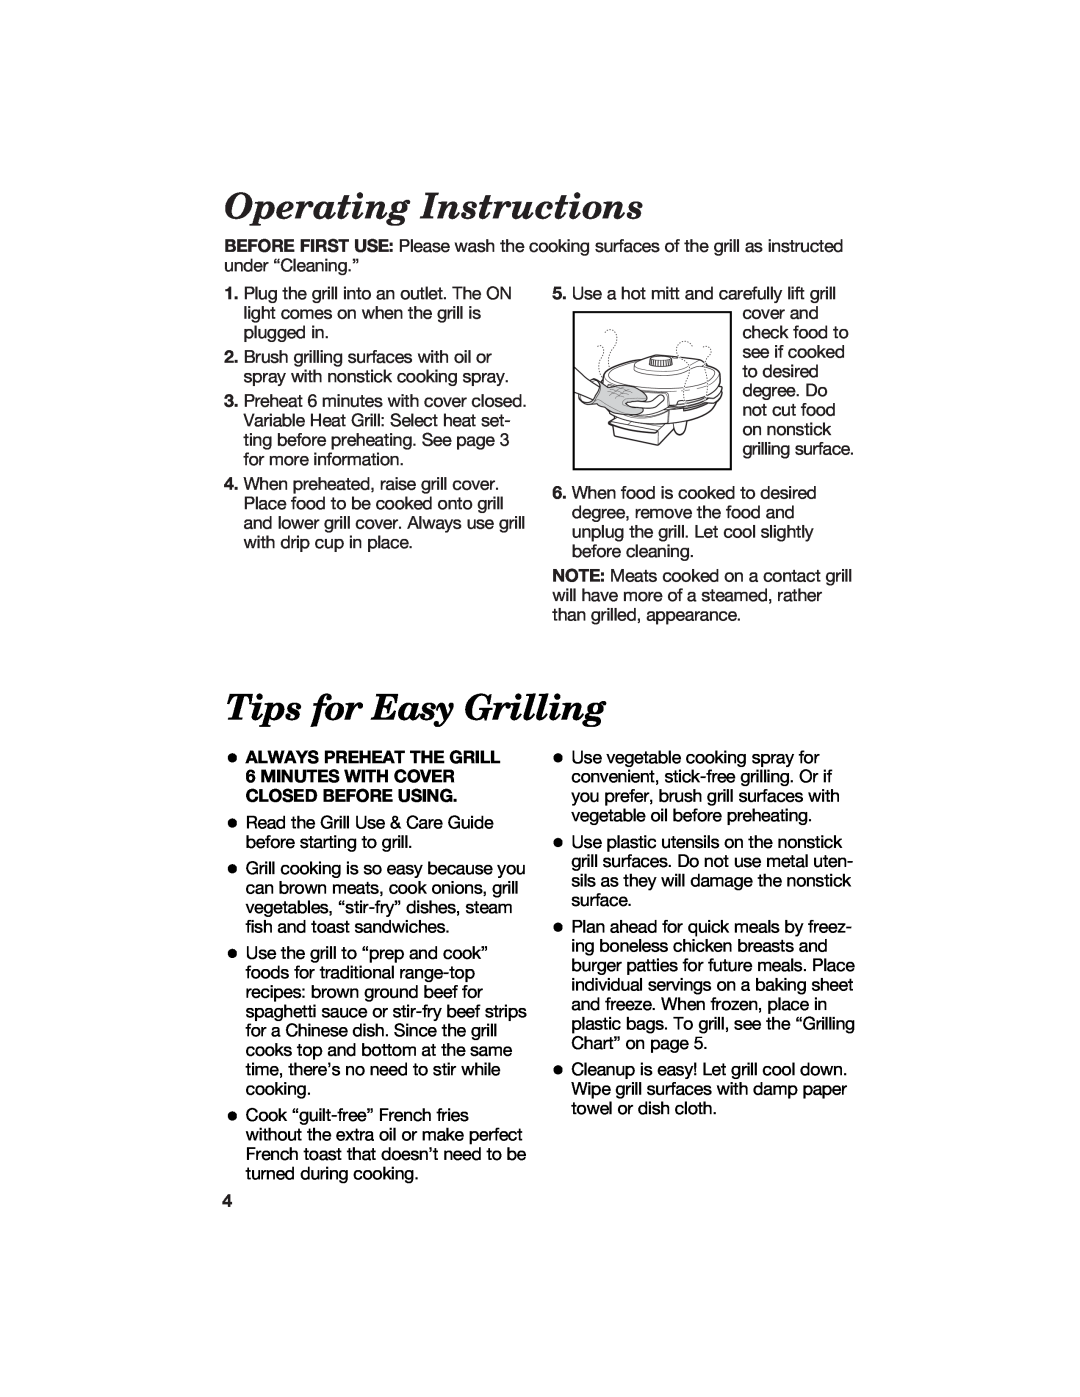 Hamilton Beach Contact Grill manual Operating Instructions, Tips for Easy Grilling 